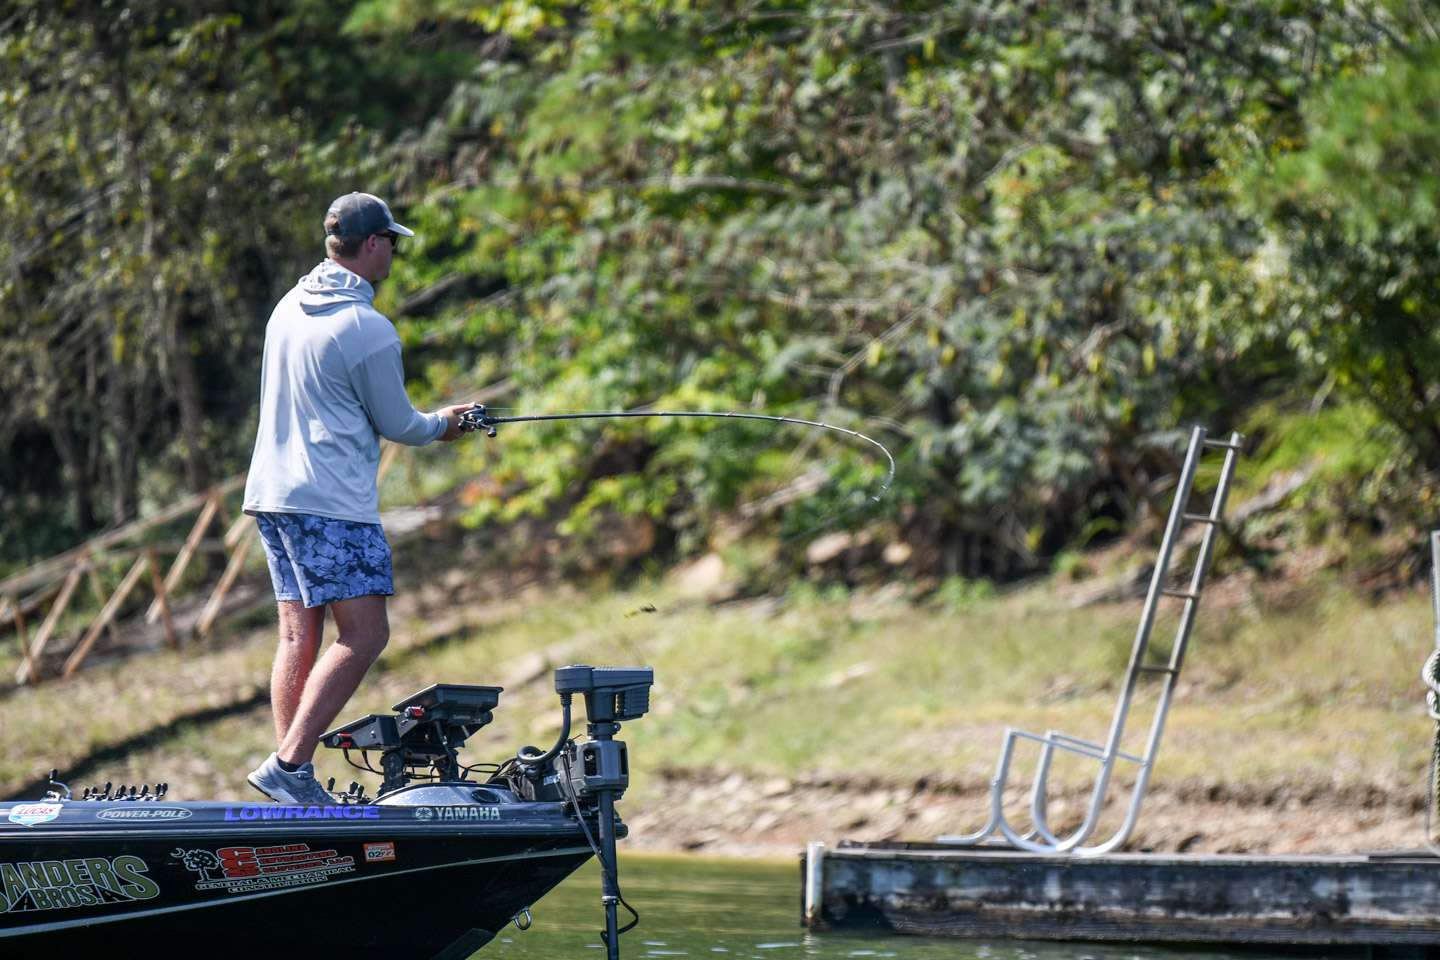 Check out Kyle Austin's Championship Saturday of the Basspro.com Bassmaster Central Open at Smith Lake.